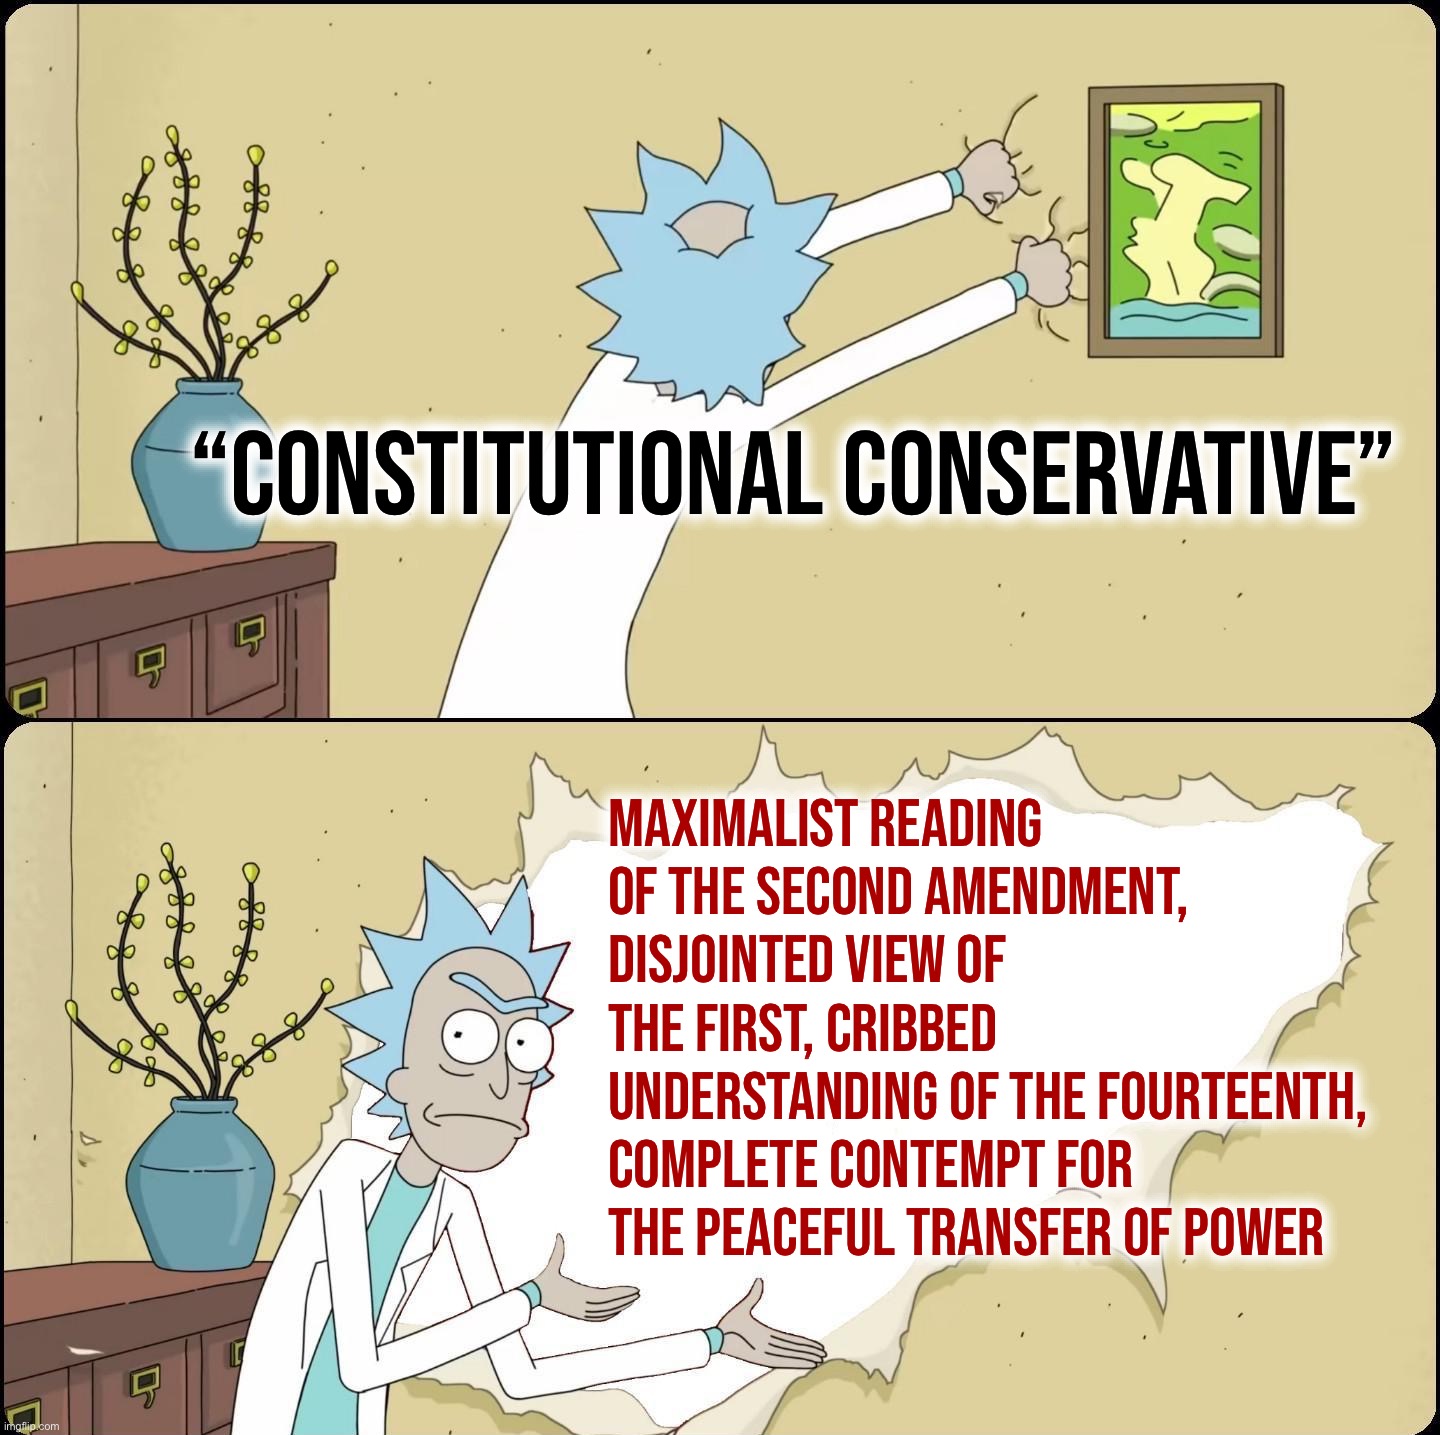 Every. Damn. Time. | “Constitutional Conservative”; Maximalist reading of the Second Amendment, disjointed view of the First, cribbed understanding of the Fourteenth, complete contempt for the peaceful transfer of power | image tagged in rick rips wallpaper,constitution,the constitution,conservative logic,conservative hypocrisy,maga | made w/ Imgflip meme maker